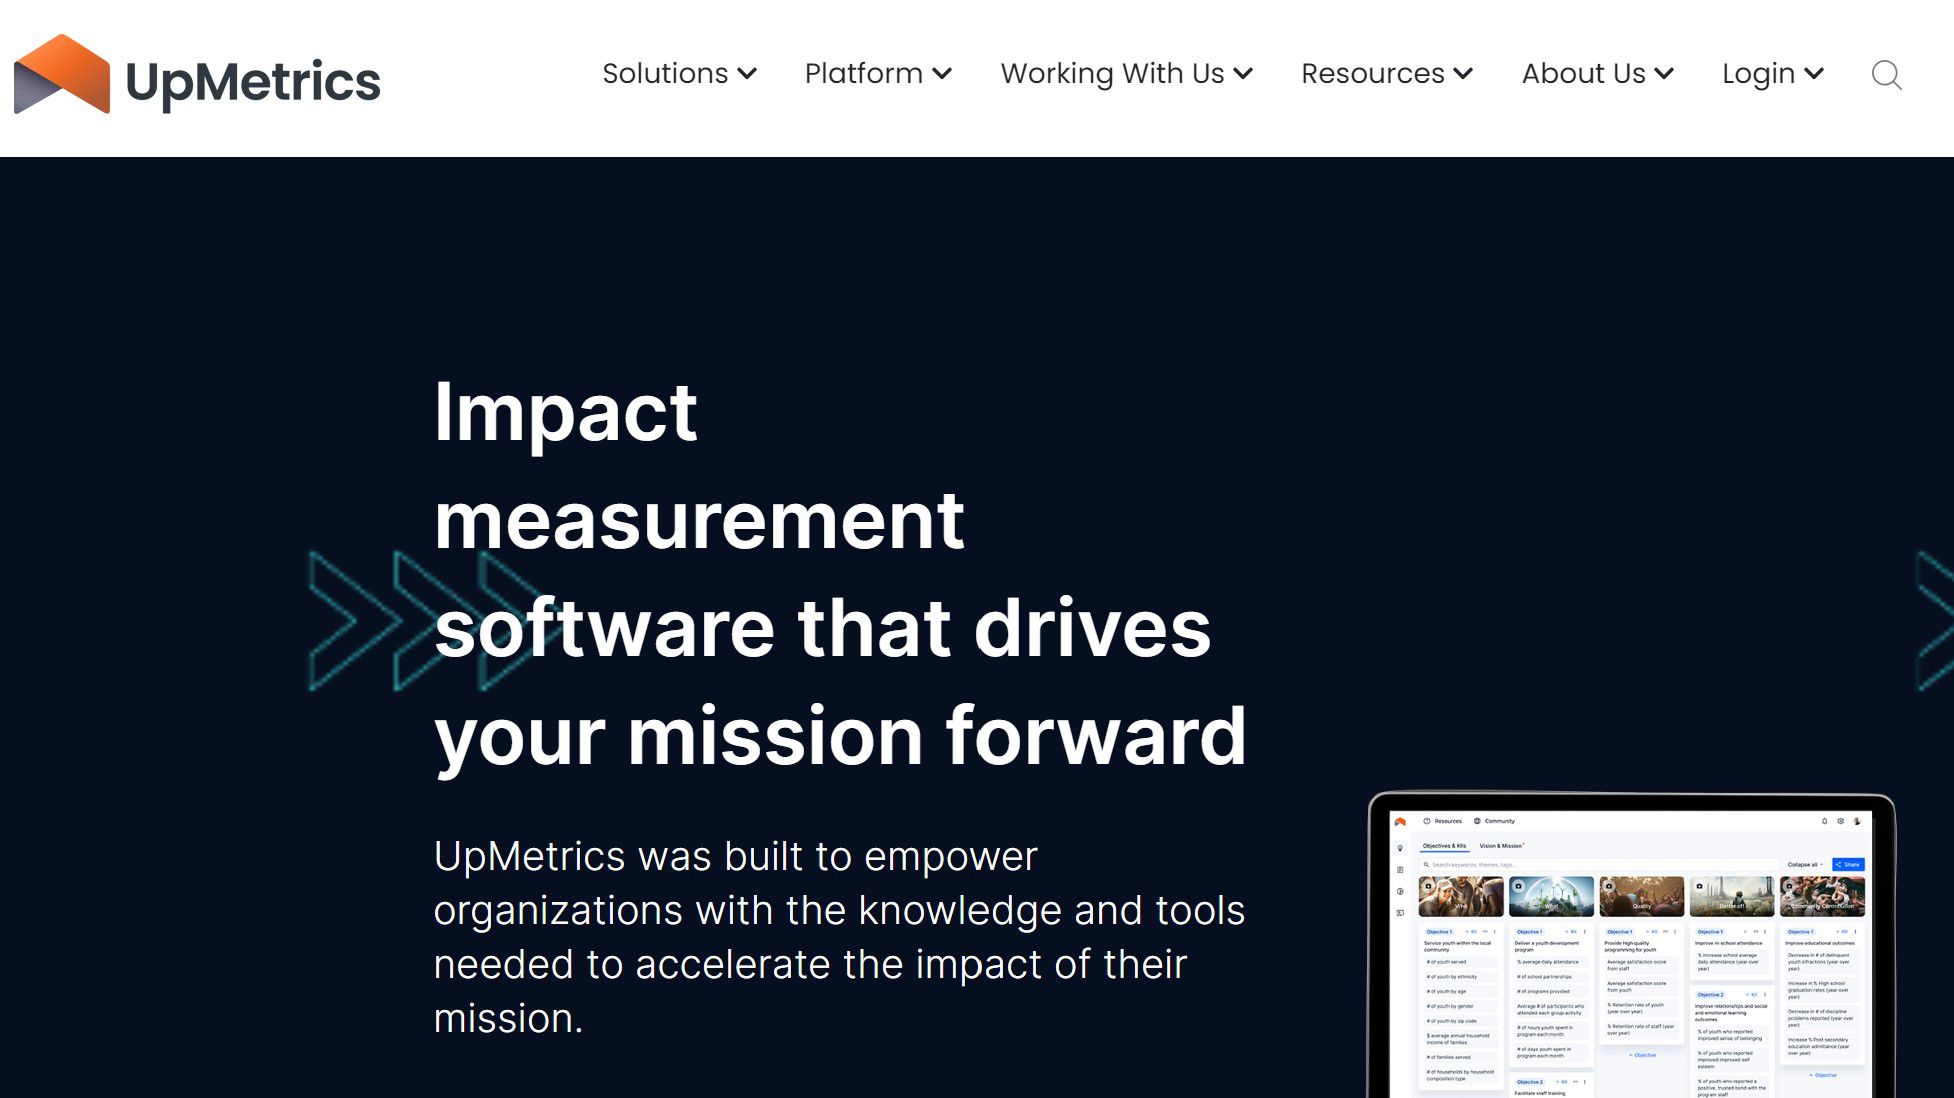 <p>Upmetrics is a flexible tool that helps individuals plan, forecast, and strategize. Its primary purpose is to enhance entrepreneurs’ decision-making capabilities through features such as financial projections, market analysis, and business model crafting.</p><p>Upmetrics also provides a business plan course to boost your knowledge and help you prepare more detailed strategies for your venture. The integrated AI assistant offers tips and valuable insights as you work.</p><p>Pros:</p><ul><li>Over 400 templates and examples to help you draft better content</li><li>Financial projections based on your inputs</li><li>Change the tone and style of your business plan to suit your needs</li><li>Pricing plans start at $9 per month, making it an affordable option</li><li>Access to step-by-step guides to help you write comprehensive plans</li></ul><p>Cons:</p><ul><li>Advanced features like strategic planning and converting generated content to docs only accessible in the premium plan</li><li>Teams are limited to five members, which can be problematic for larger organizations</li><li>Possibility for inaccurate or overly generic information</li></ul><p>Pricing:</p><ul><li>Starter plan for $9 per month</li><li>Premium plan for $19 per month</li></ul>